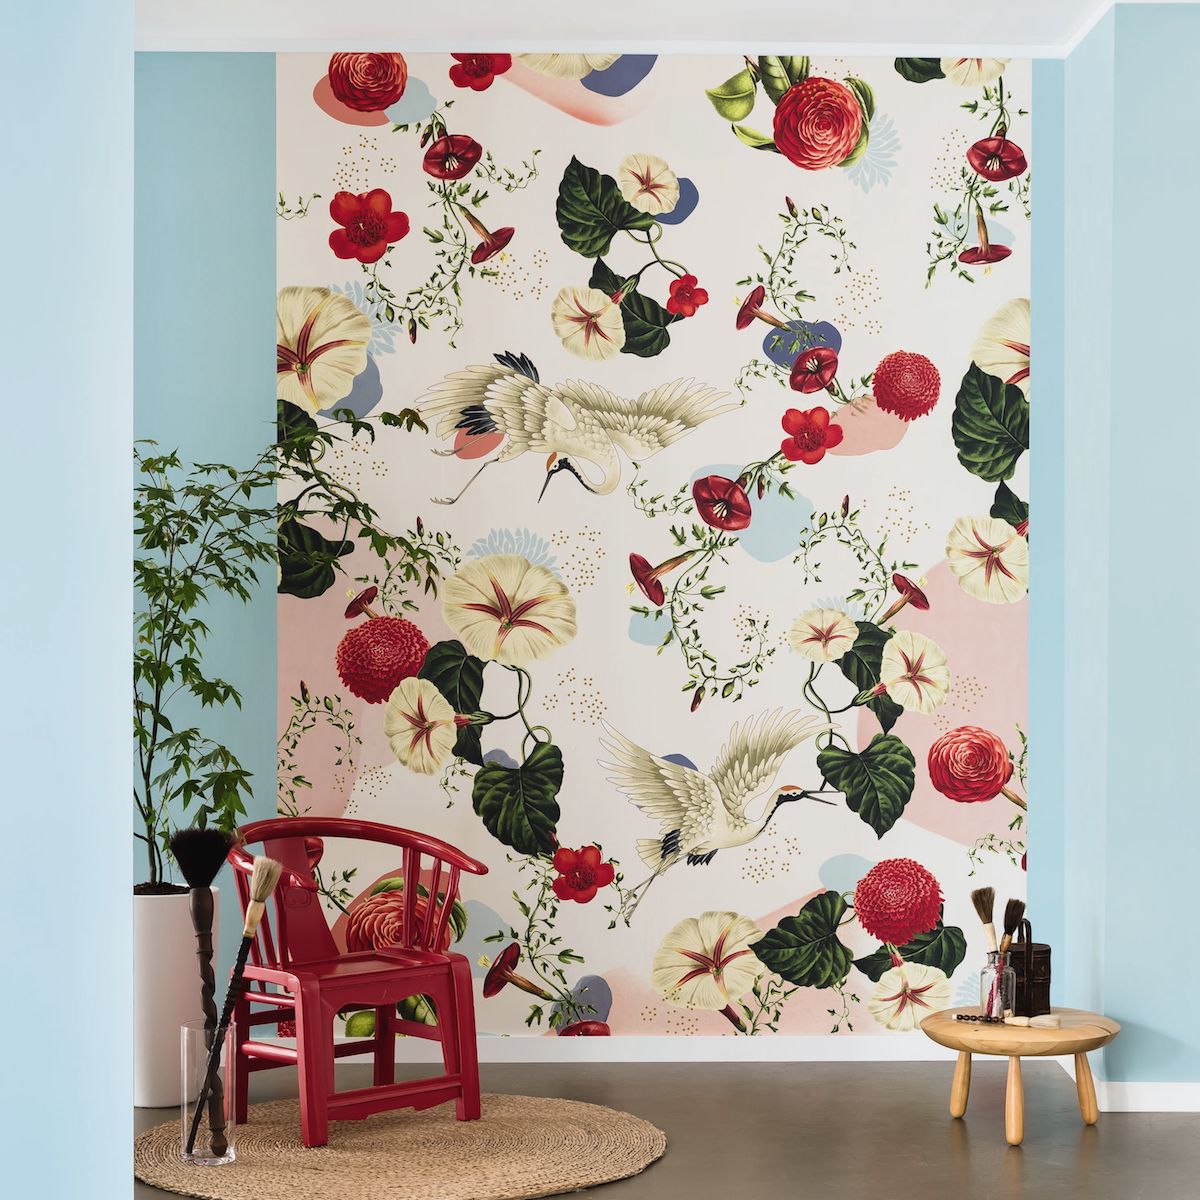 Tropical Birds Are The New Decorating Trend Ing To A Wall Near You